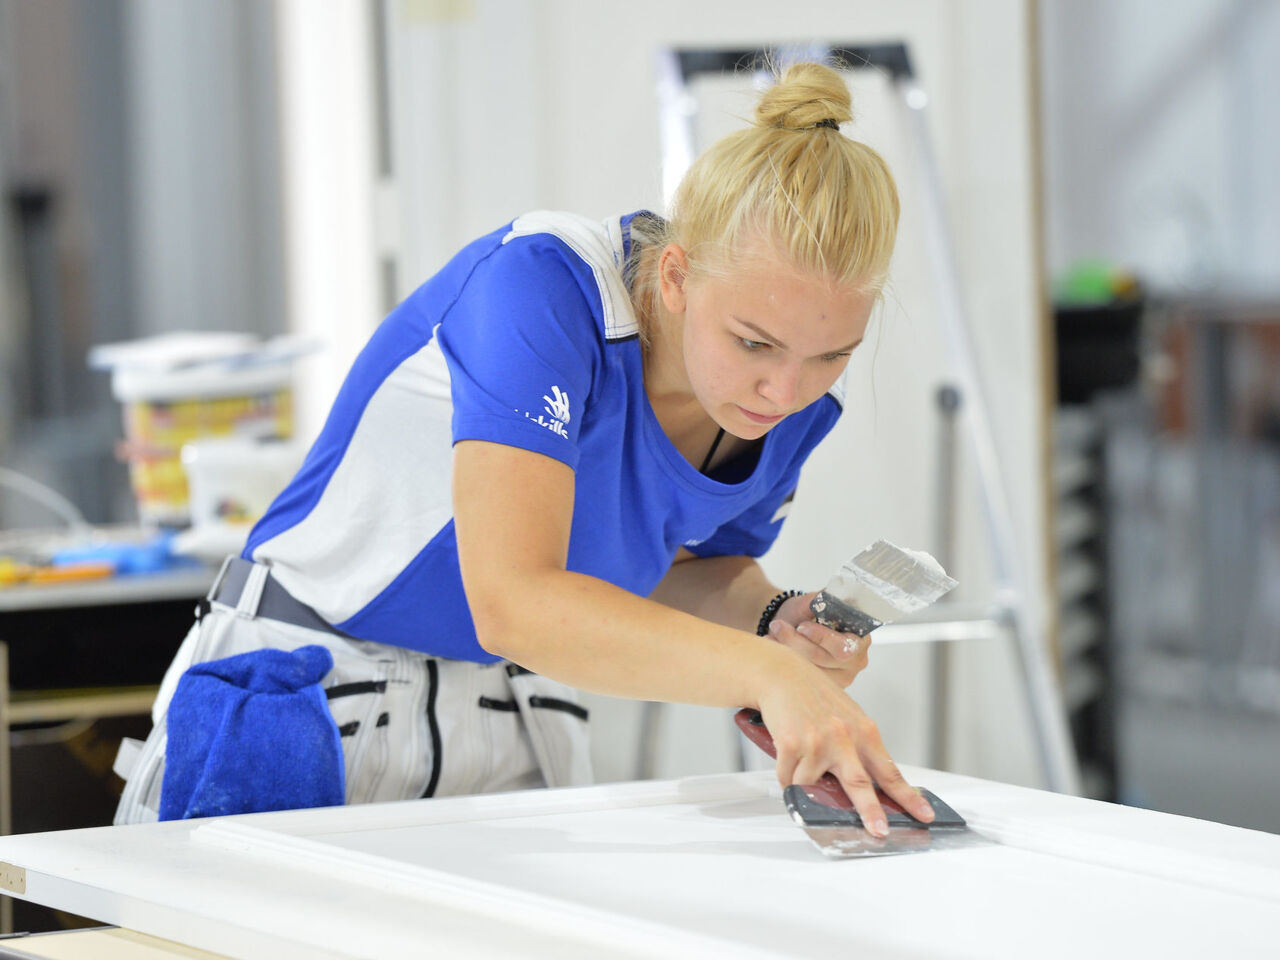 A painting and decorating competitor from Estonia at WorldSkills Kazan 2019.